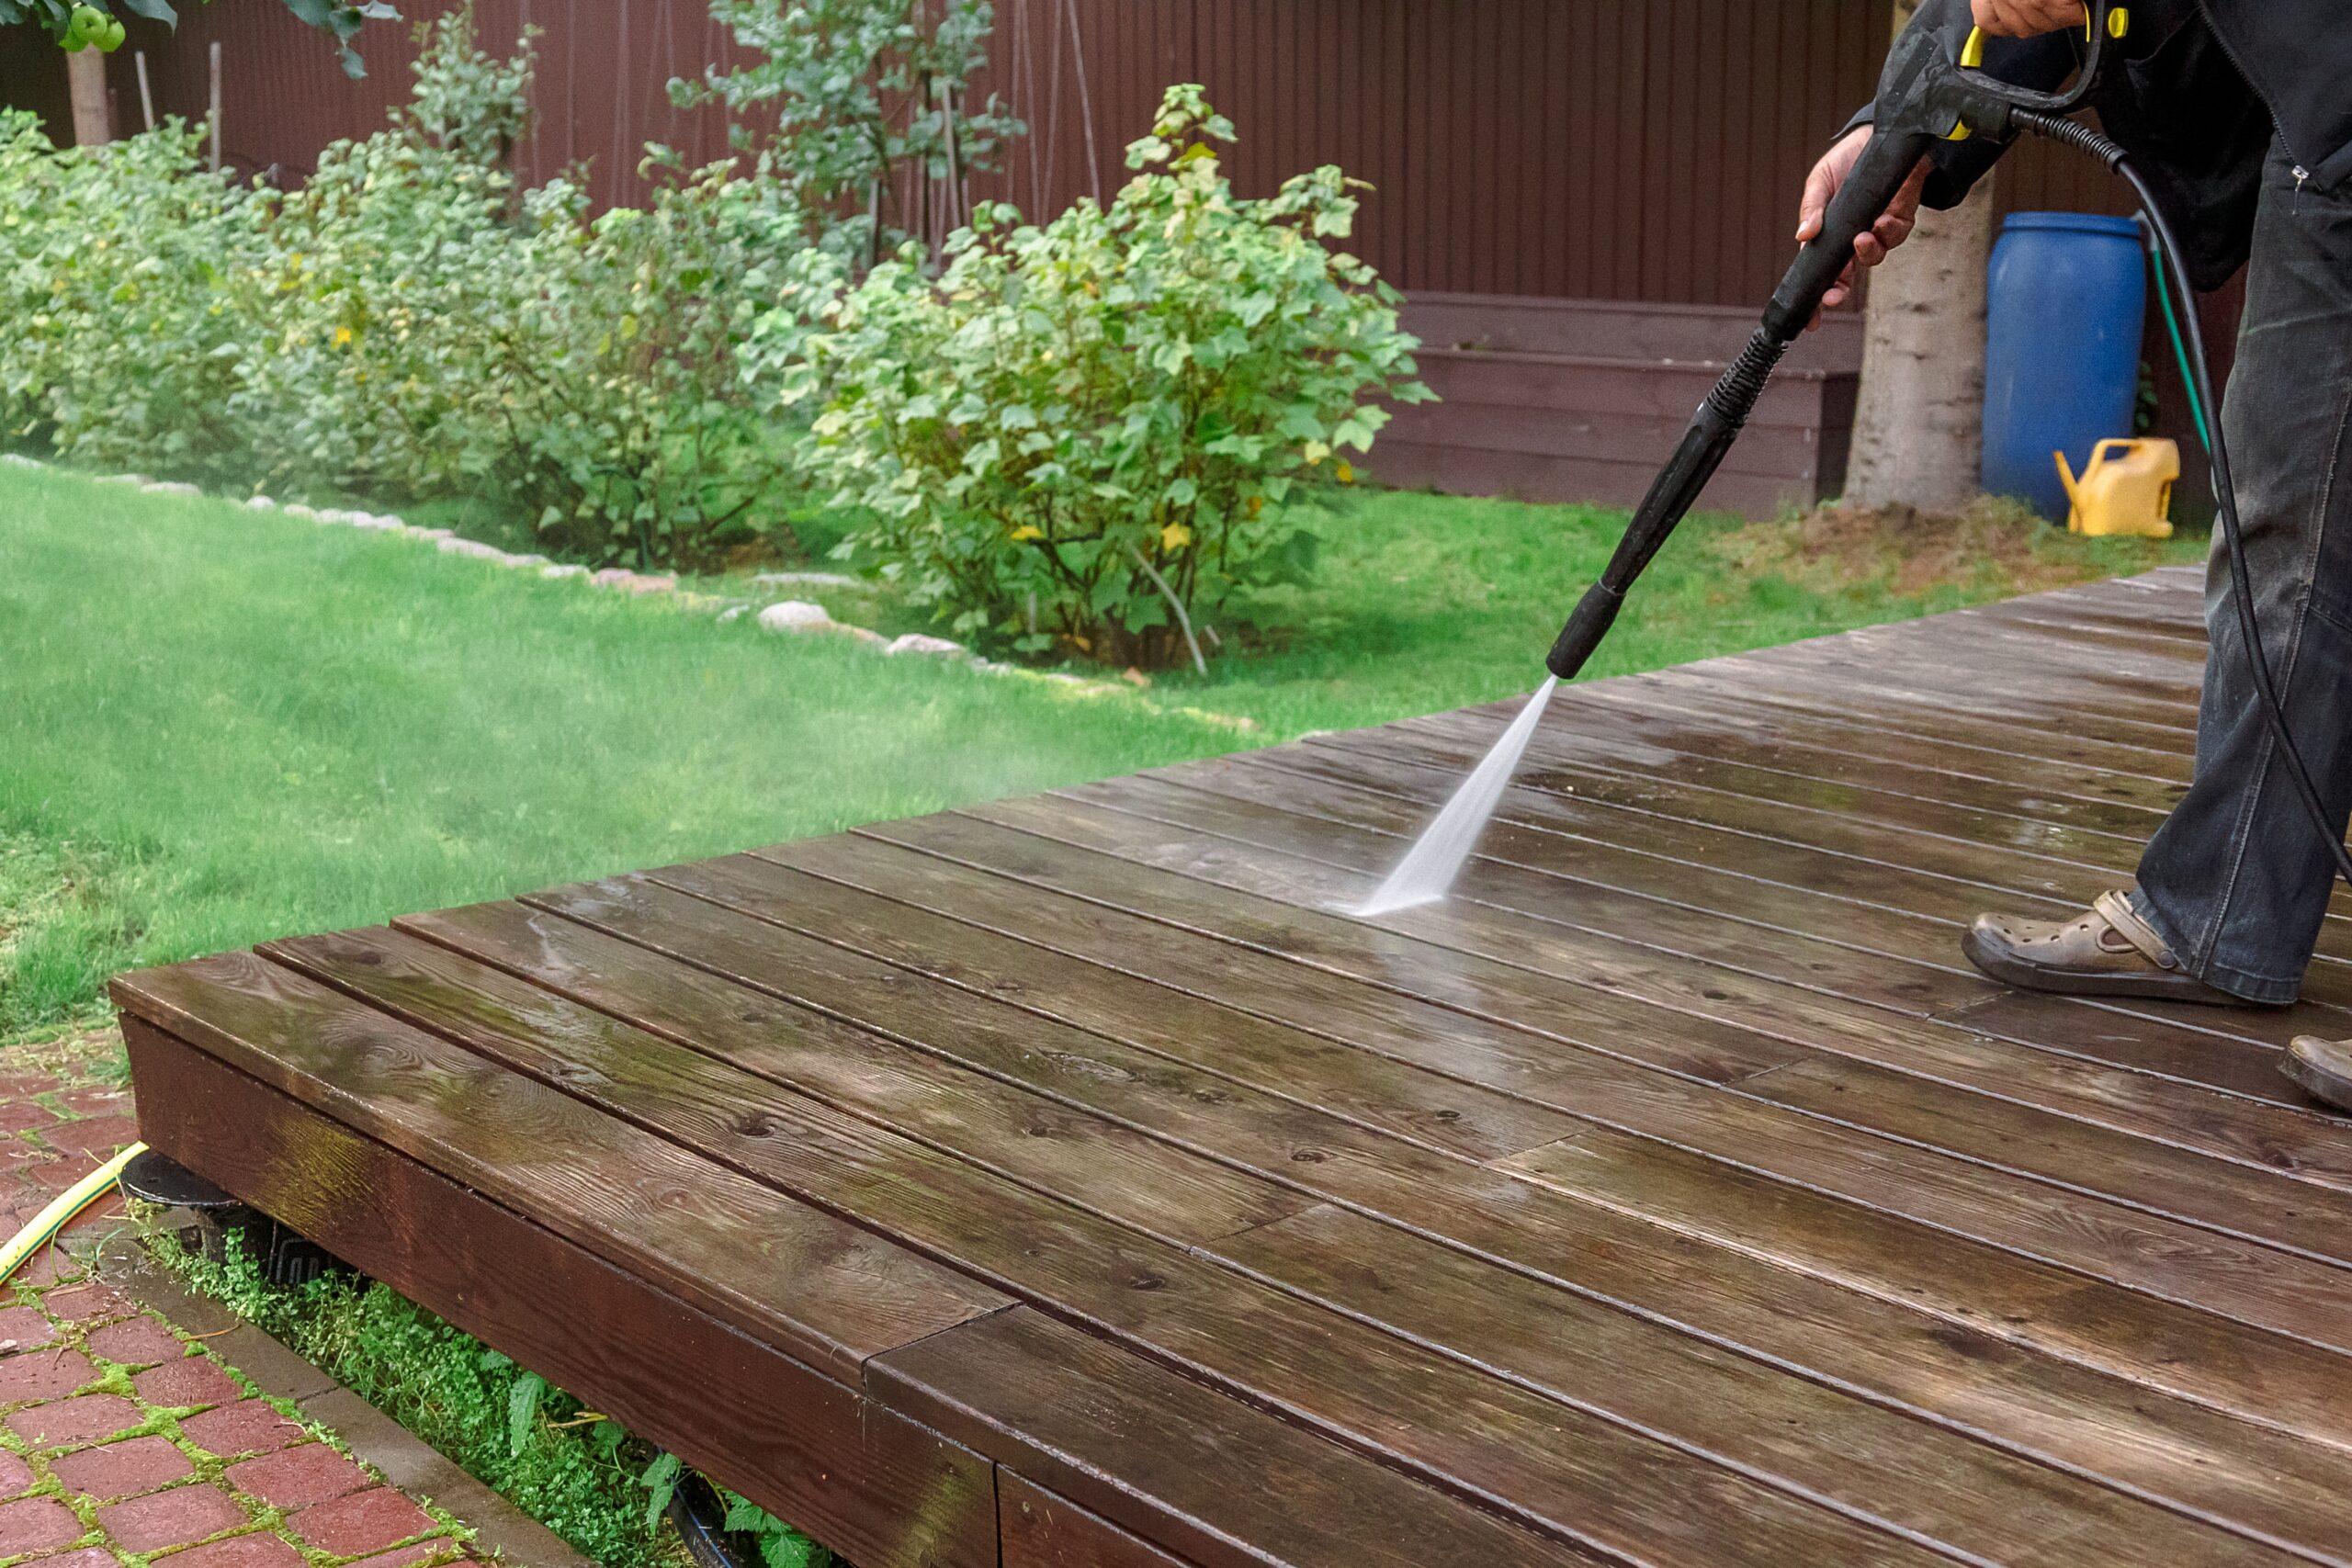 The Environmental Impact of Pressure Washing: How to Clean Responsibly